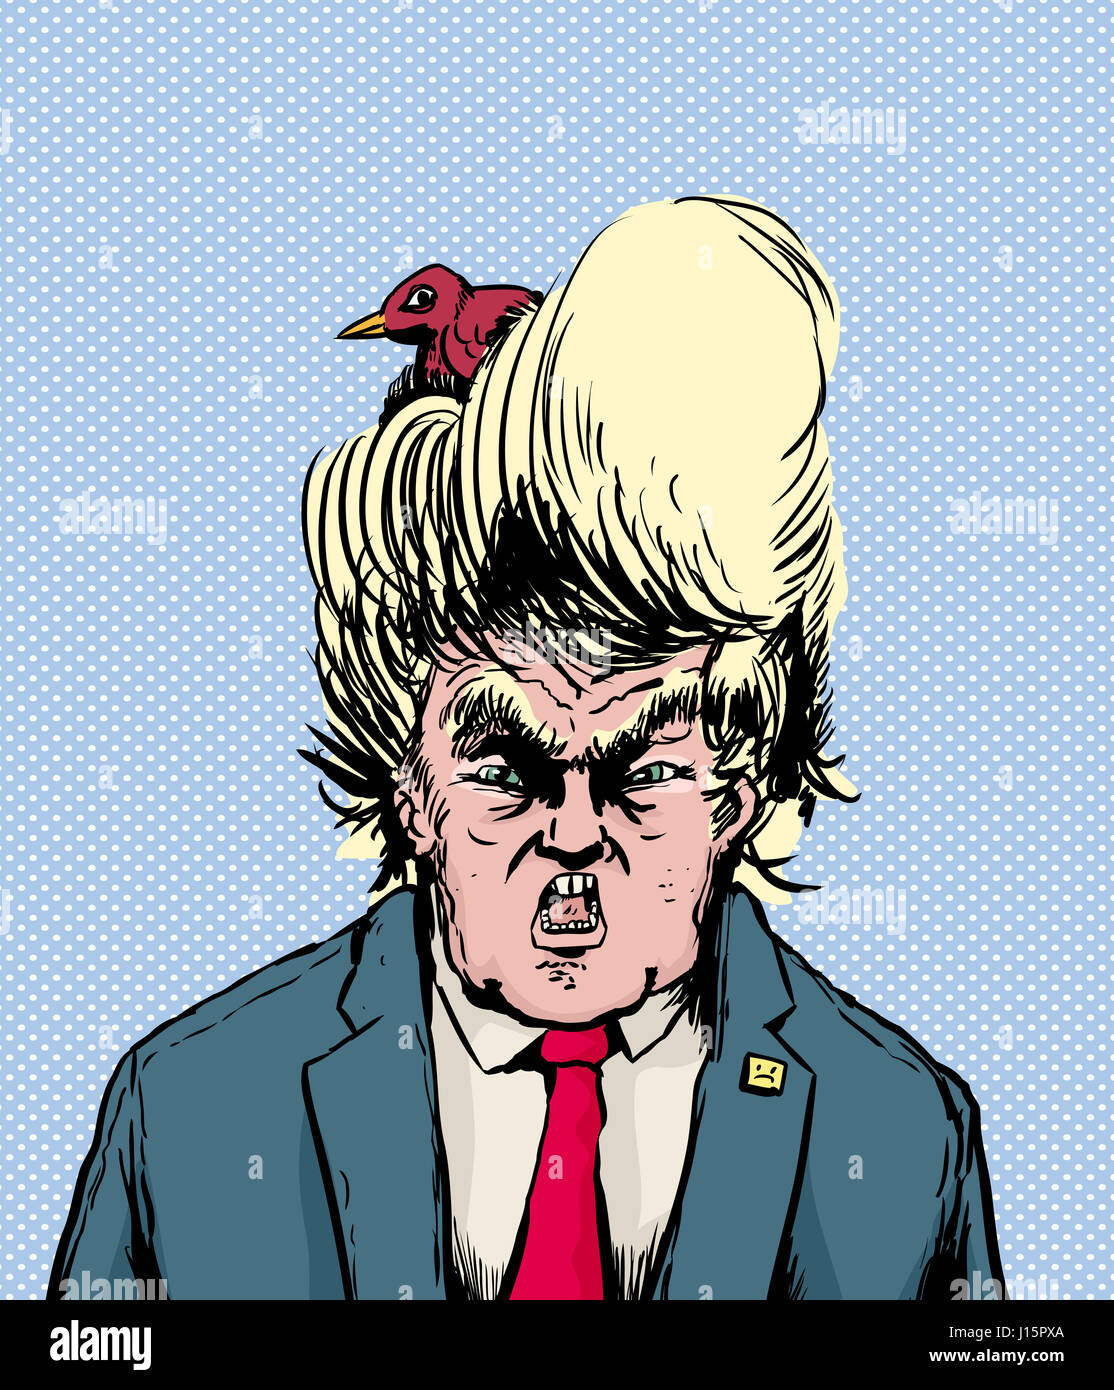 April 18, 2017. Caricature of screaming Donald Trump with bird nesting in his hair Stock Photo